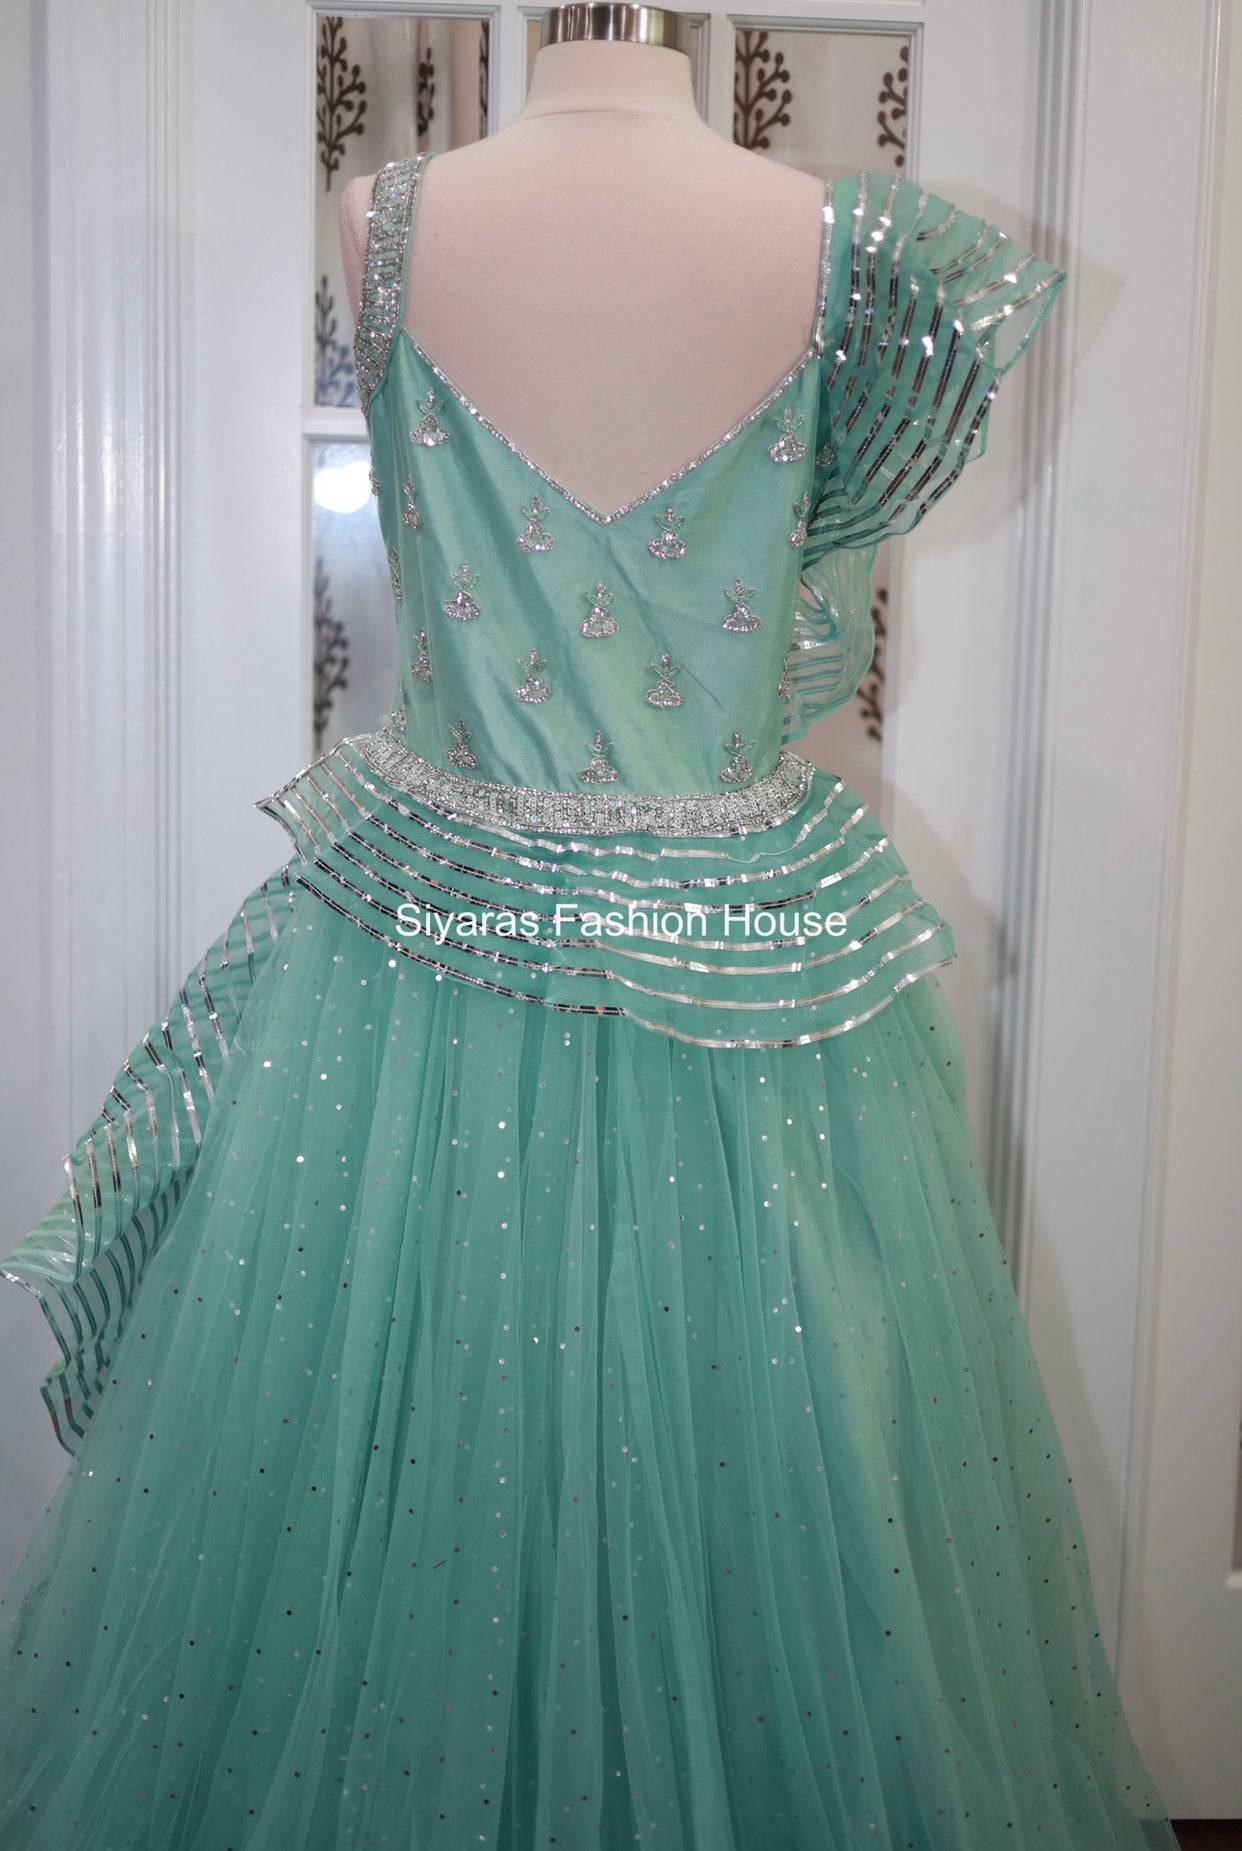 Partywear/Pageant Gown with Metallic stylish Top grand looking